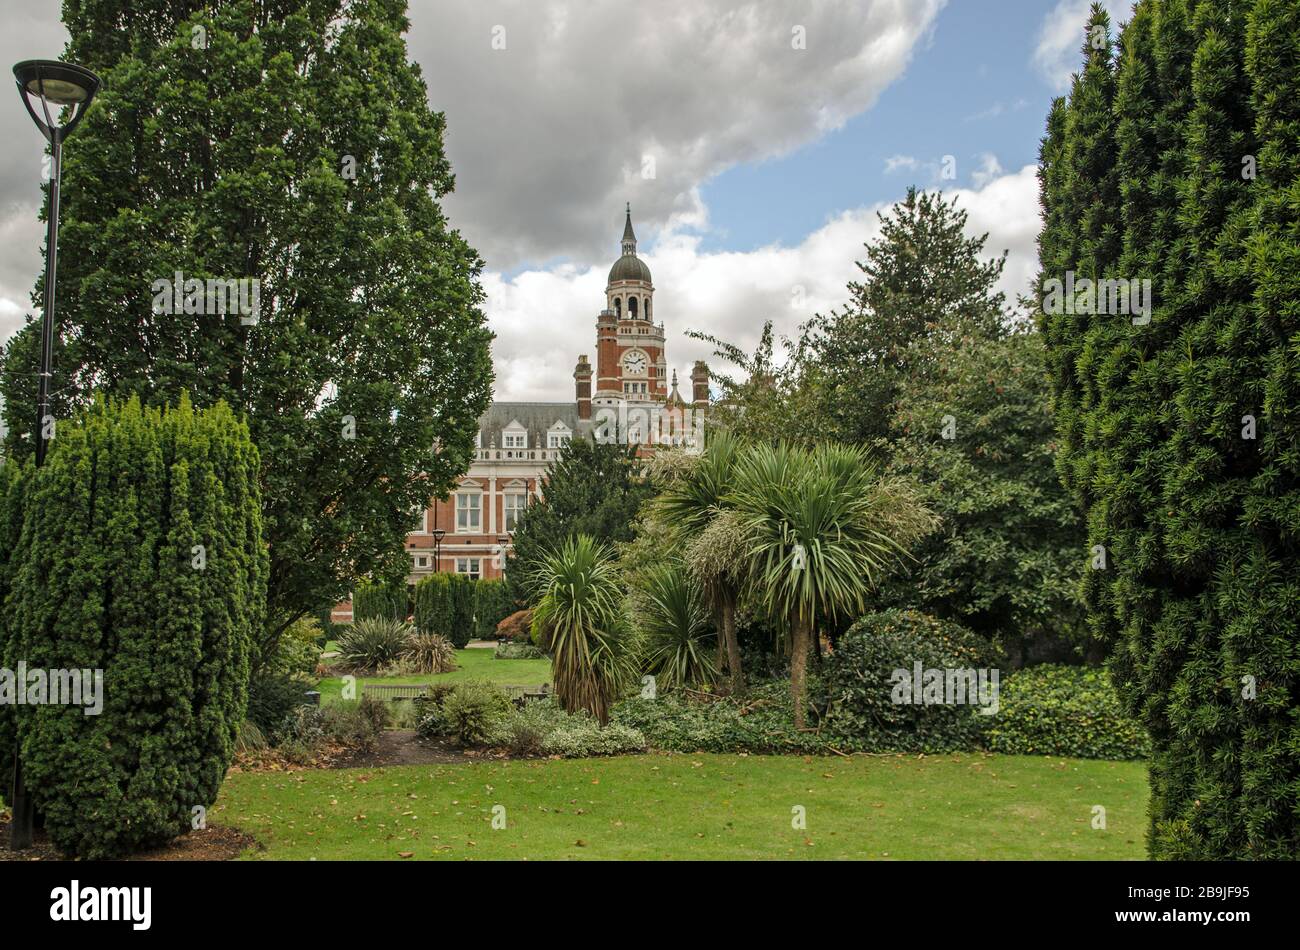 The peaceful Queen's Gardens, overlooked by the Victorian town hall which houses the headquarters of Croydon City Council in the centre of the city in Stock Photo